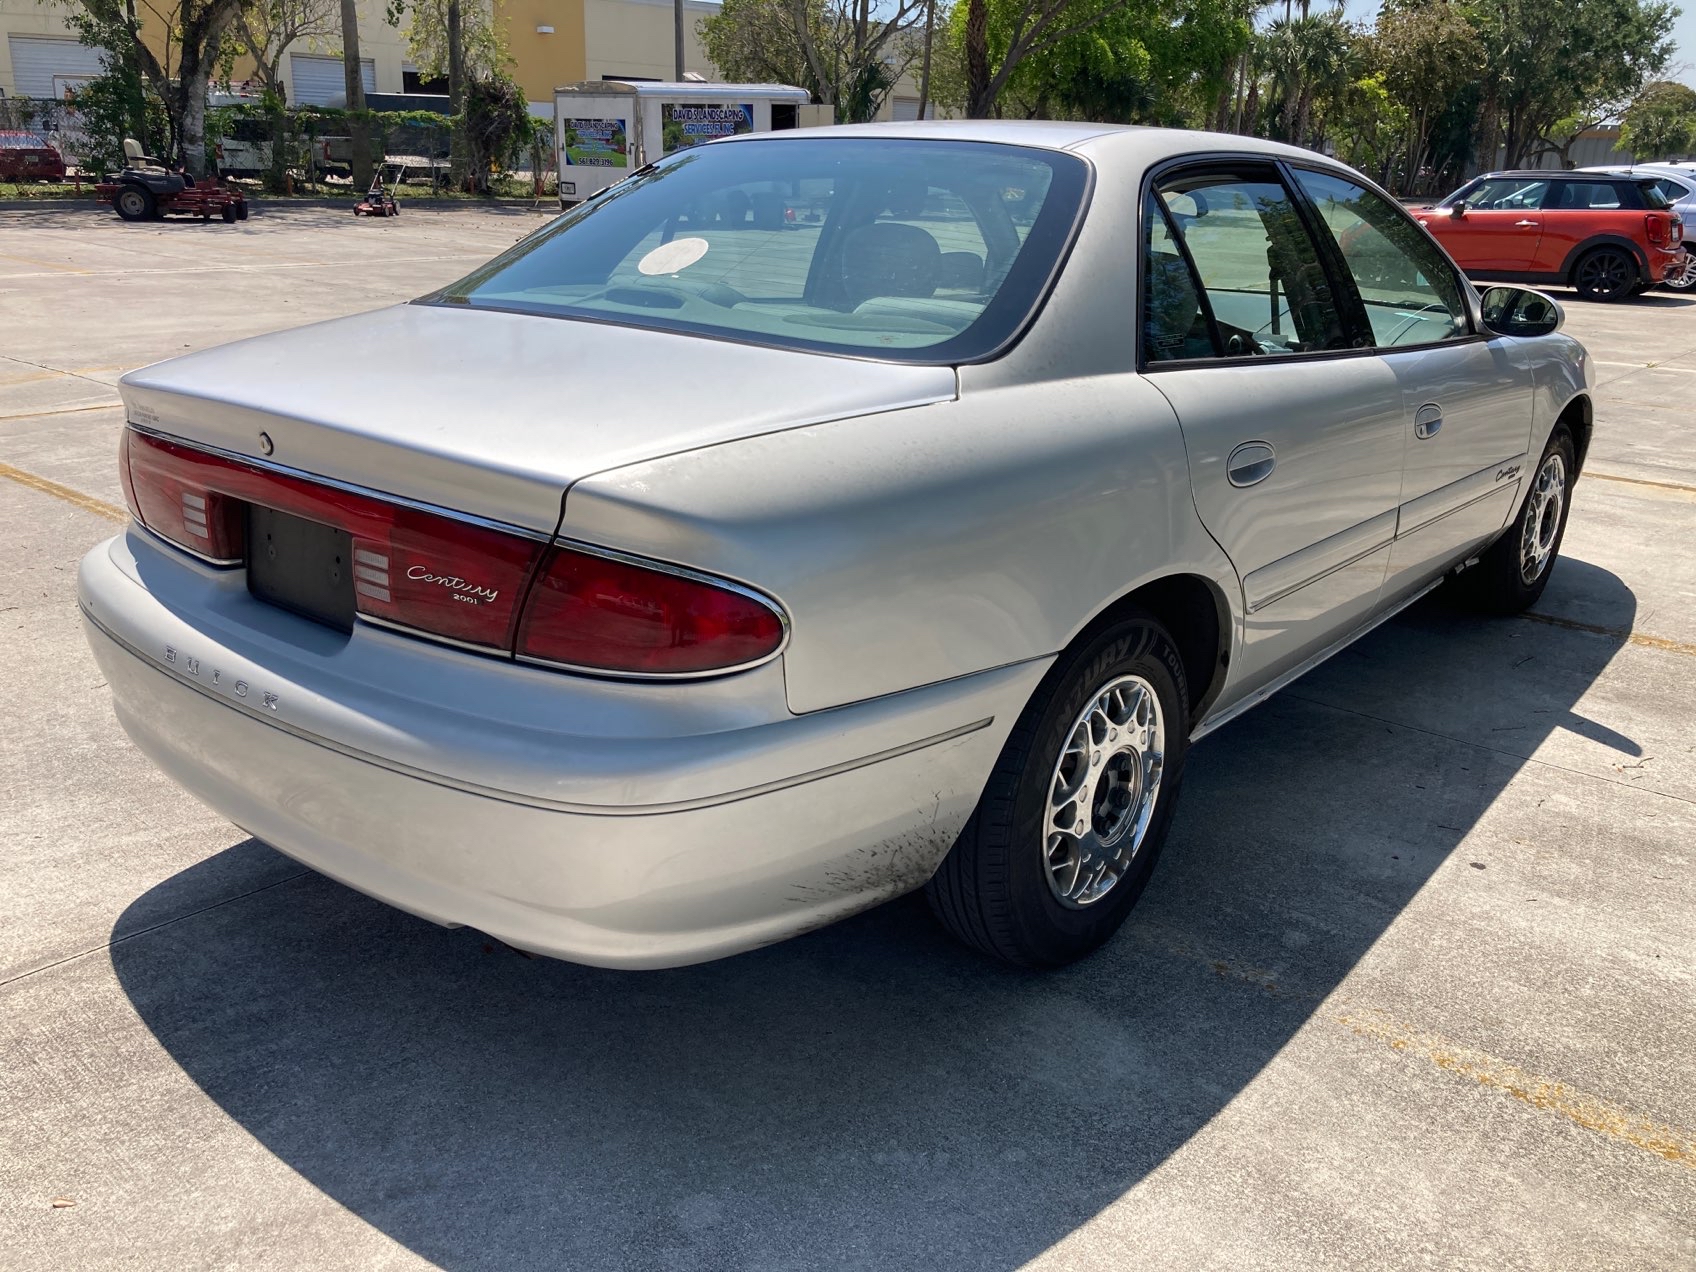 Used 2001 BUICK CENTURY CUSTOM for sale in MARGATE | 127228